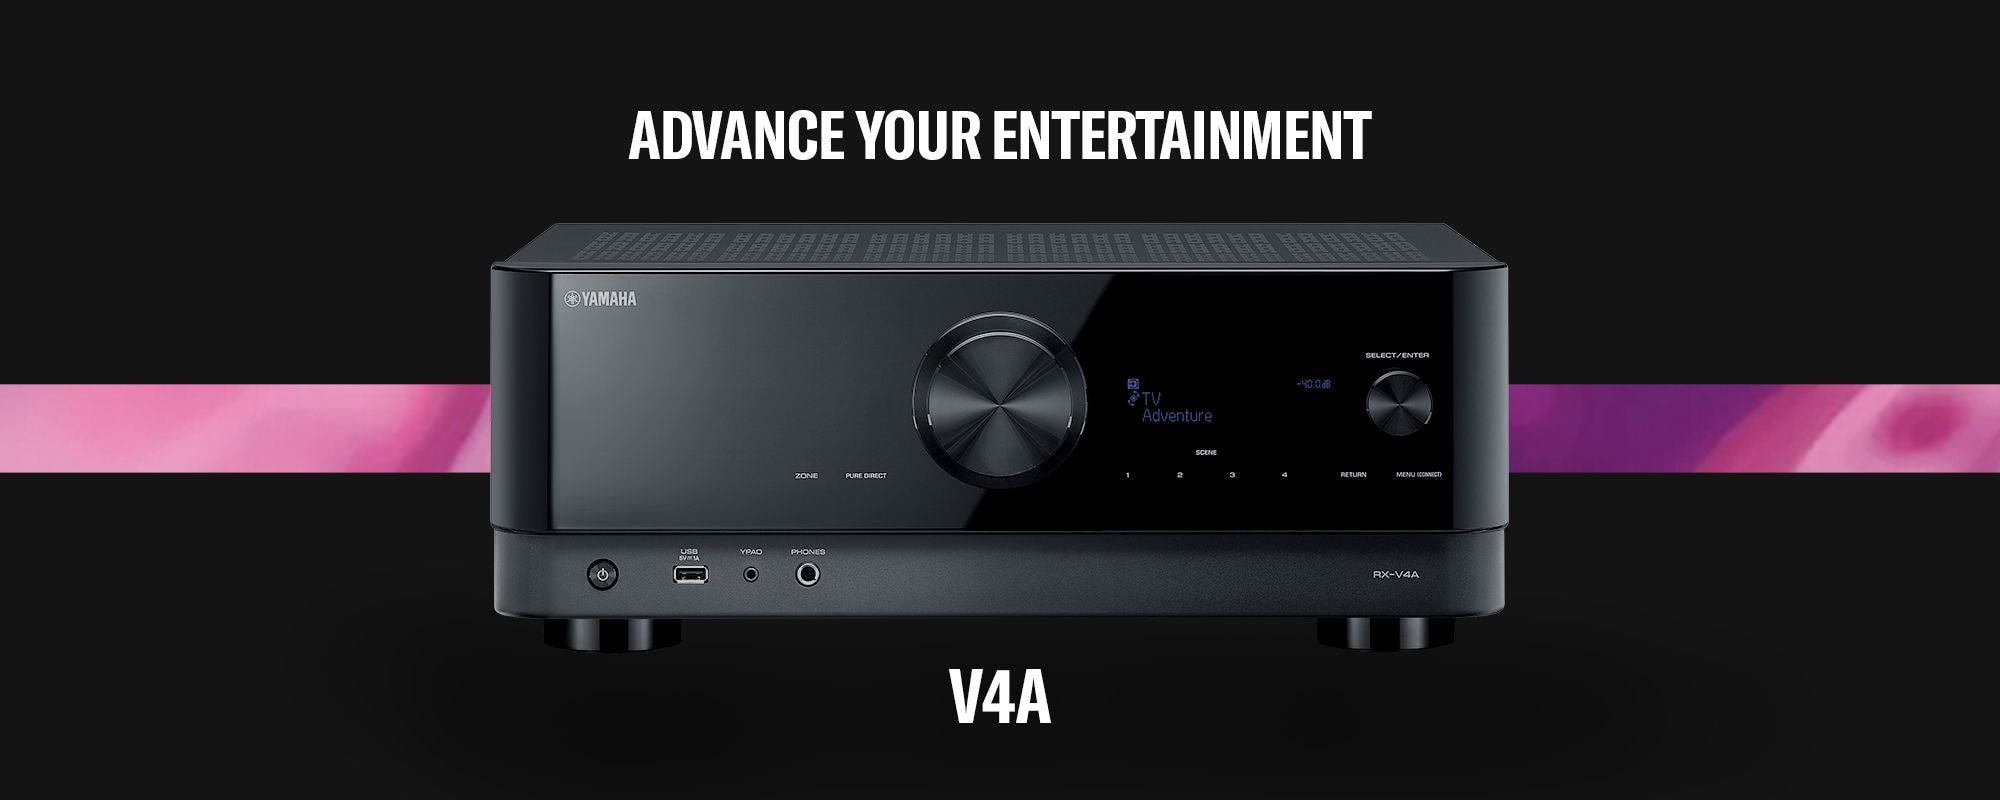 RX-V4A - Overview - AV Receivers - Audio &amp; Visual - Products - Yamaha -  Canada - English